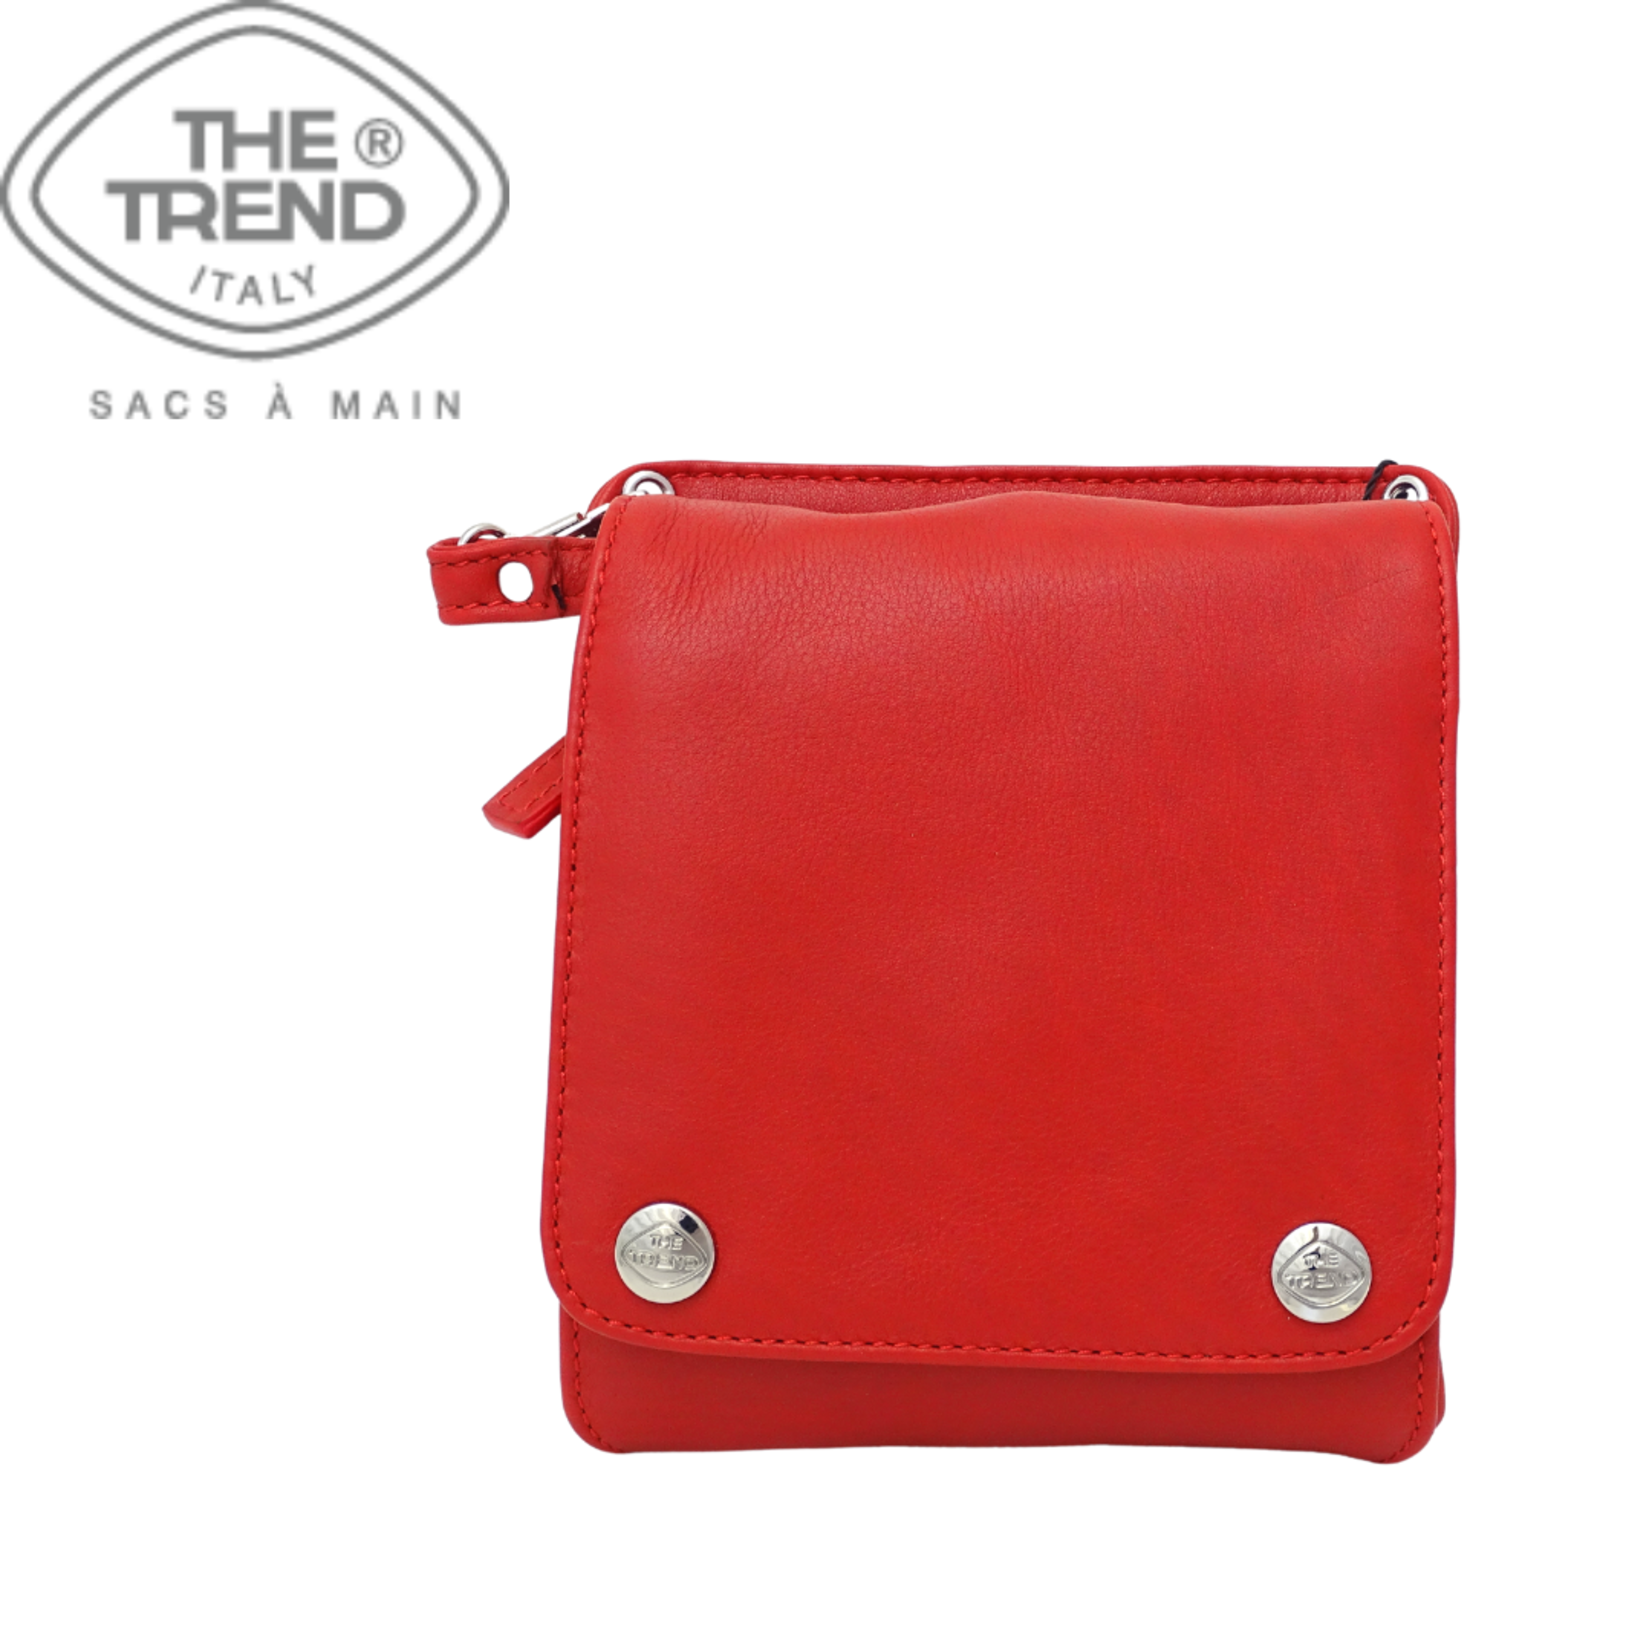 The Trend The Trend s22-585517 red